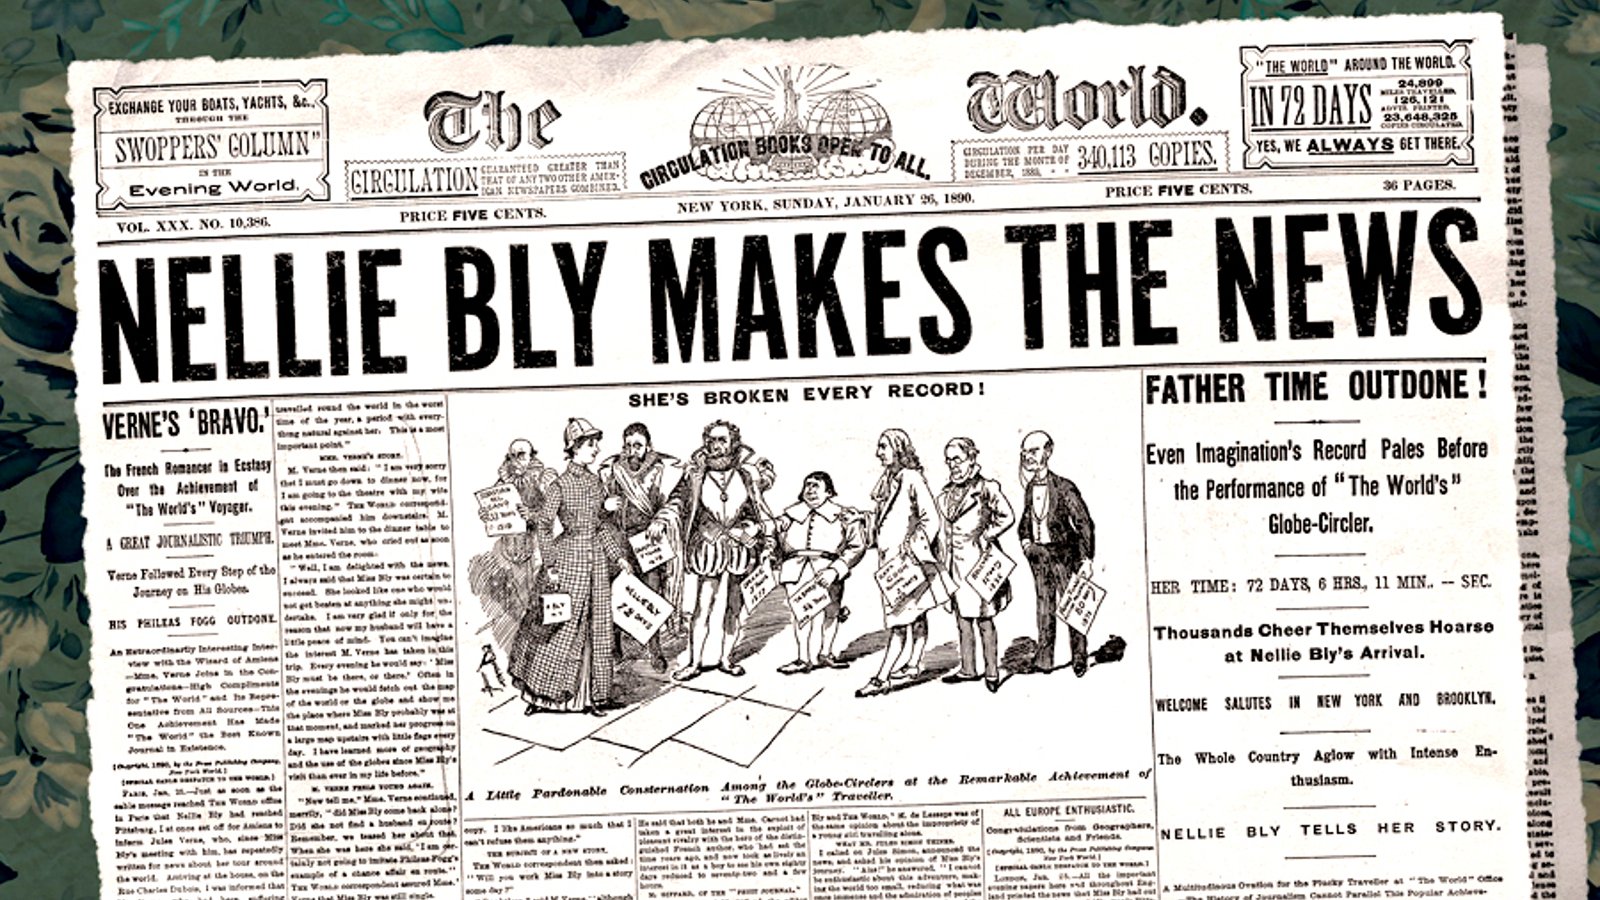 Nellie Bly Makes the News - A Legendary Investigative Reporter